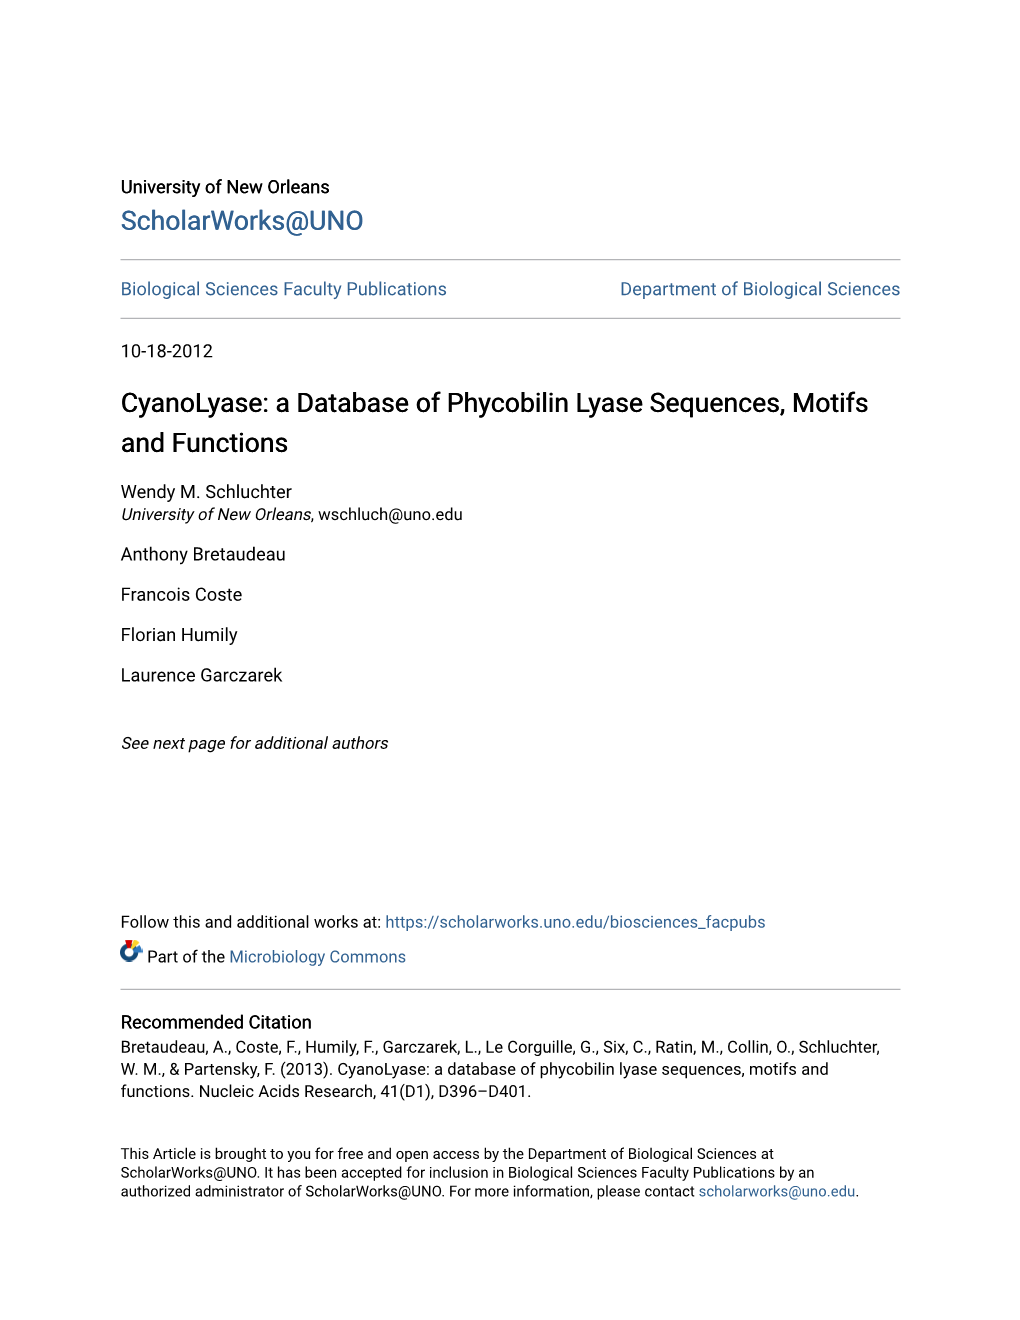 A Database of Phycobilin Lyase Sequences, Motifs and Functions